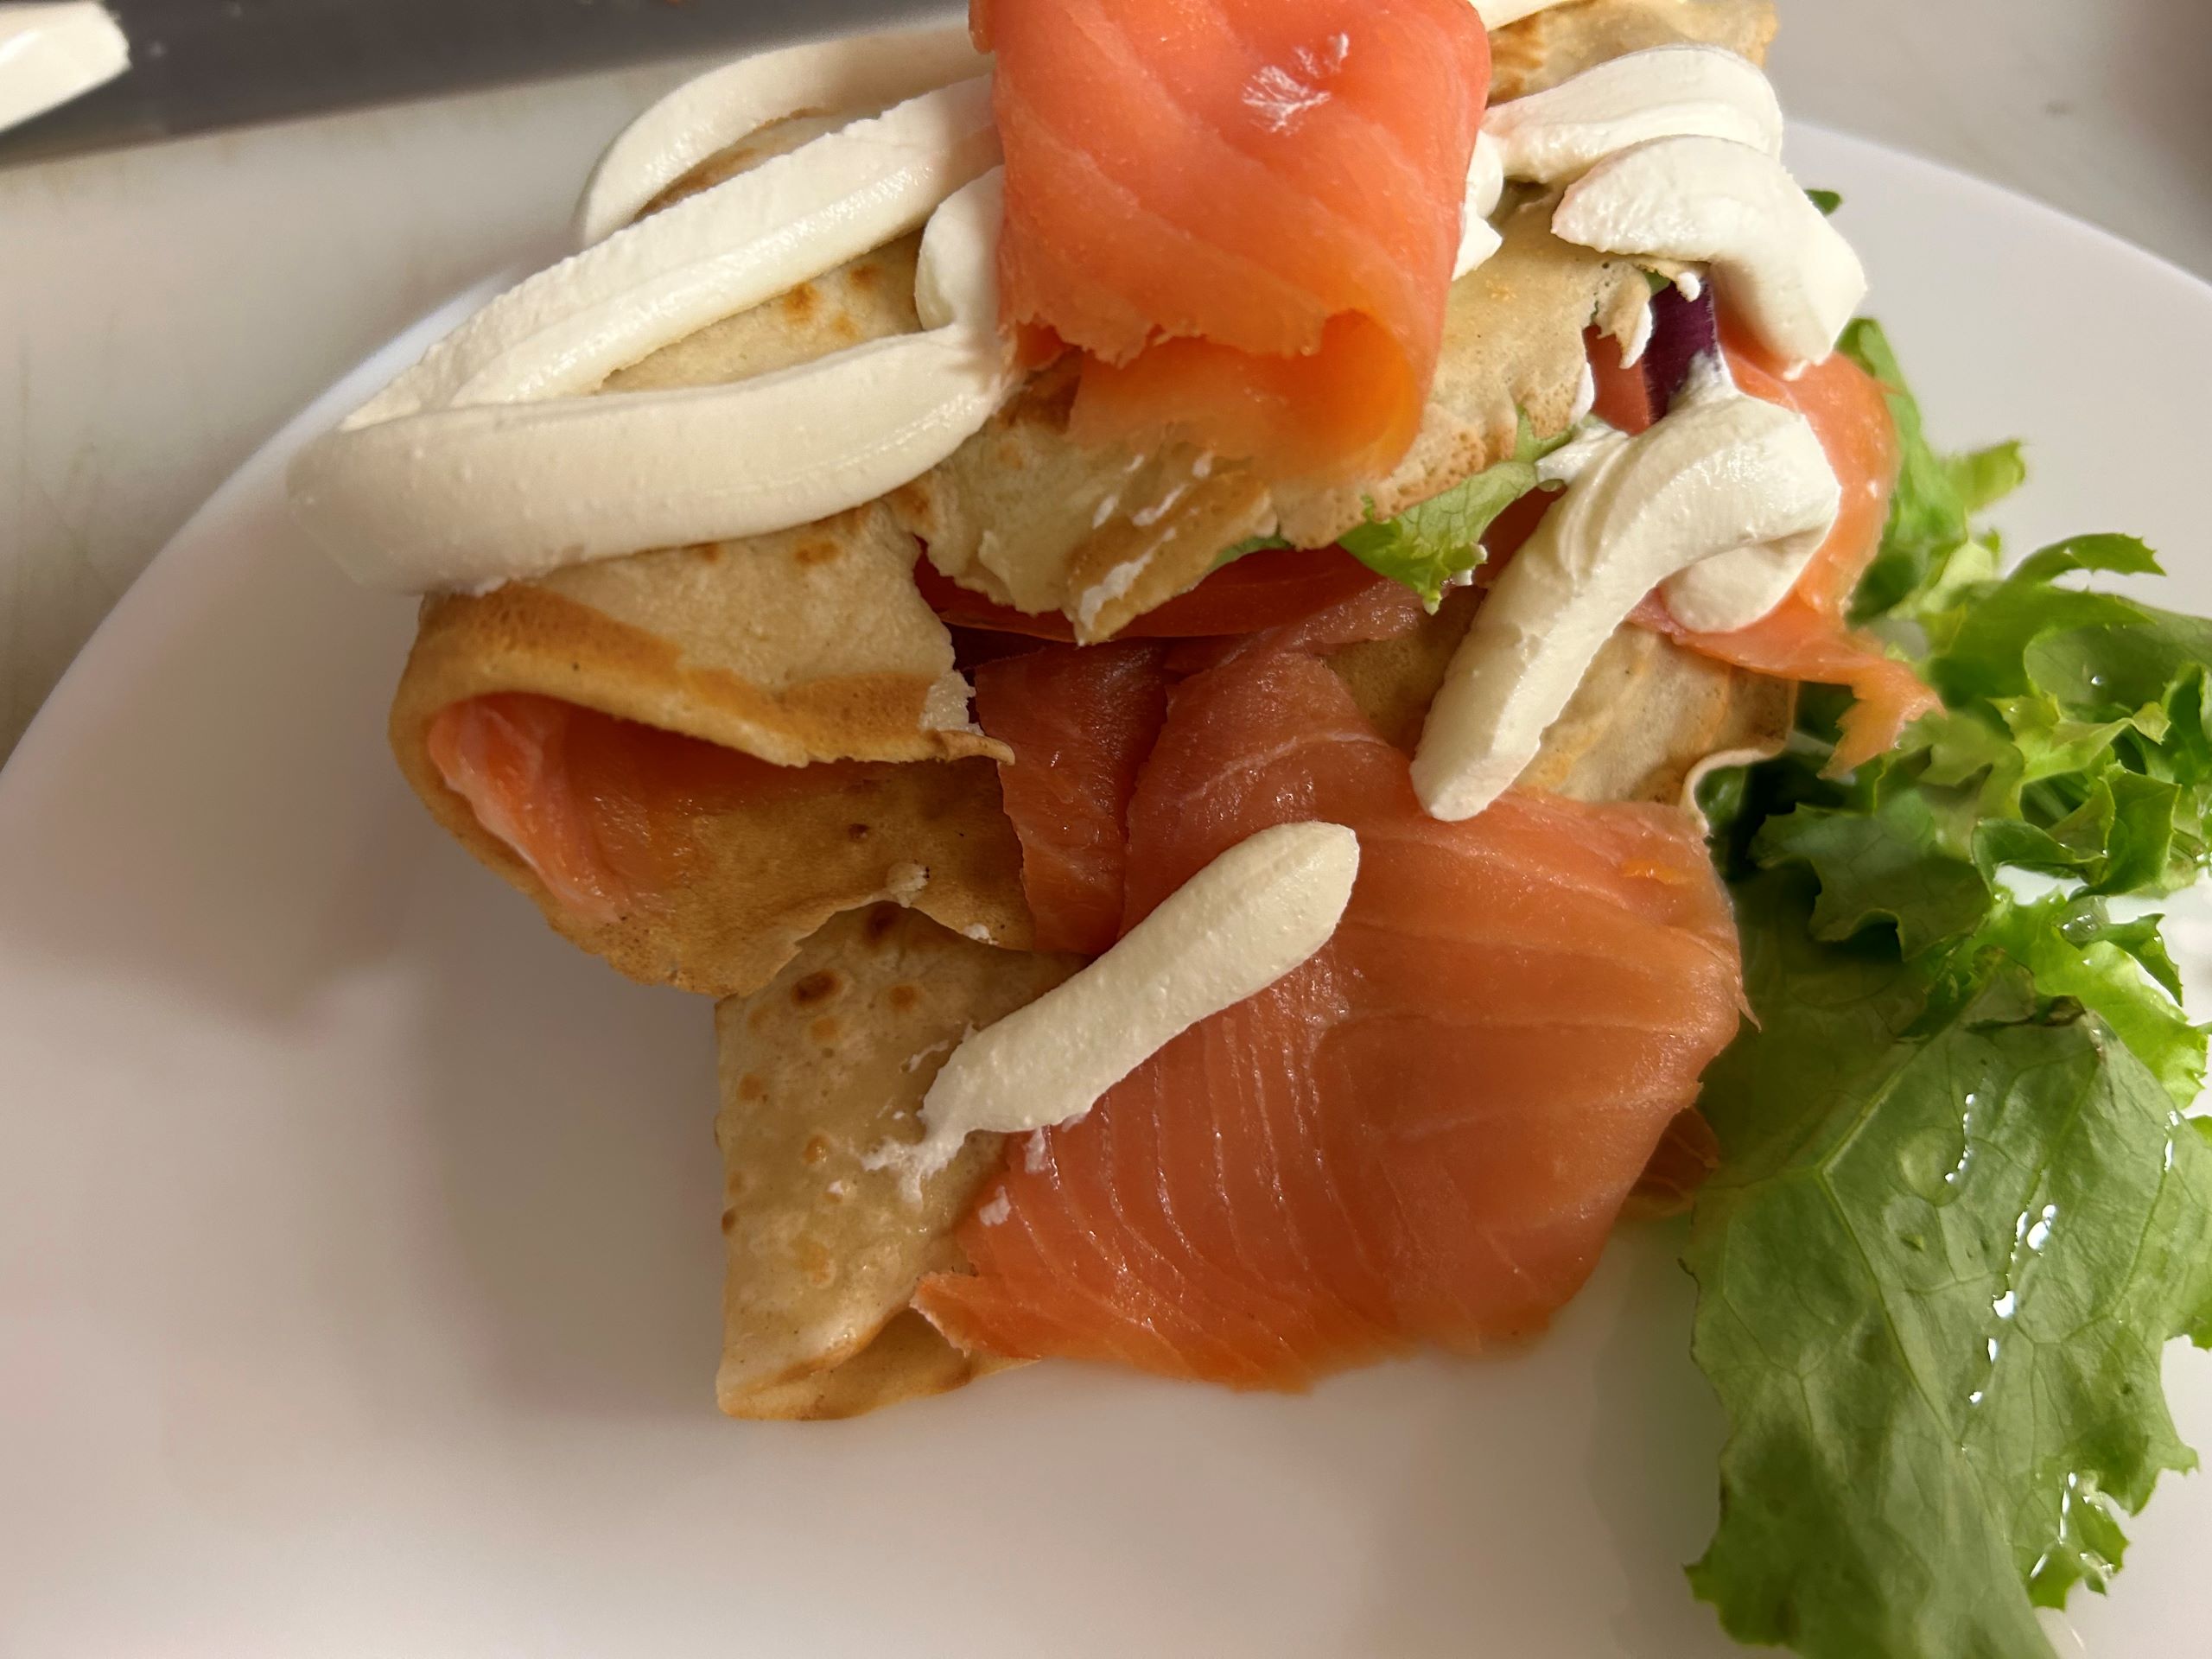 Slices of Smoked Salmon and Cream Cheese Spread artfully wrapped in a blintz pancake with crispy lettuce and slices of tomatoes, red onions, on a white plate, close up.